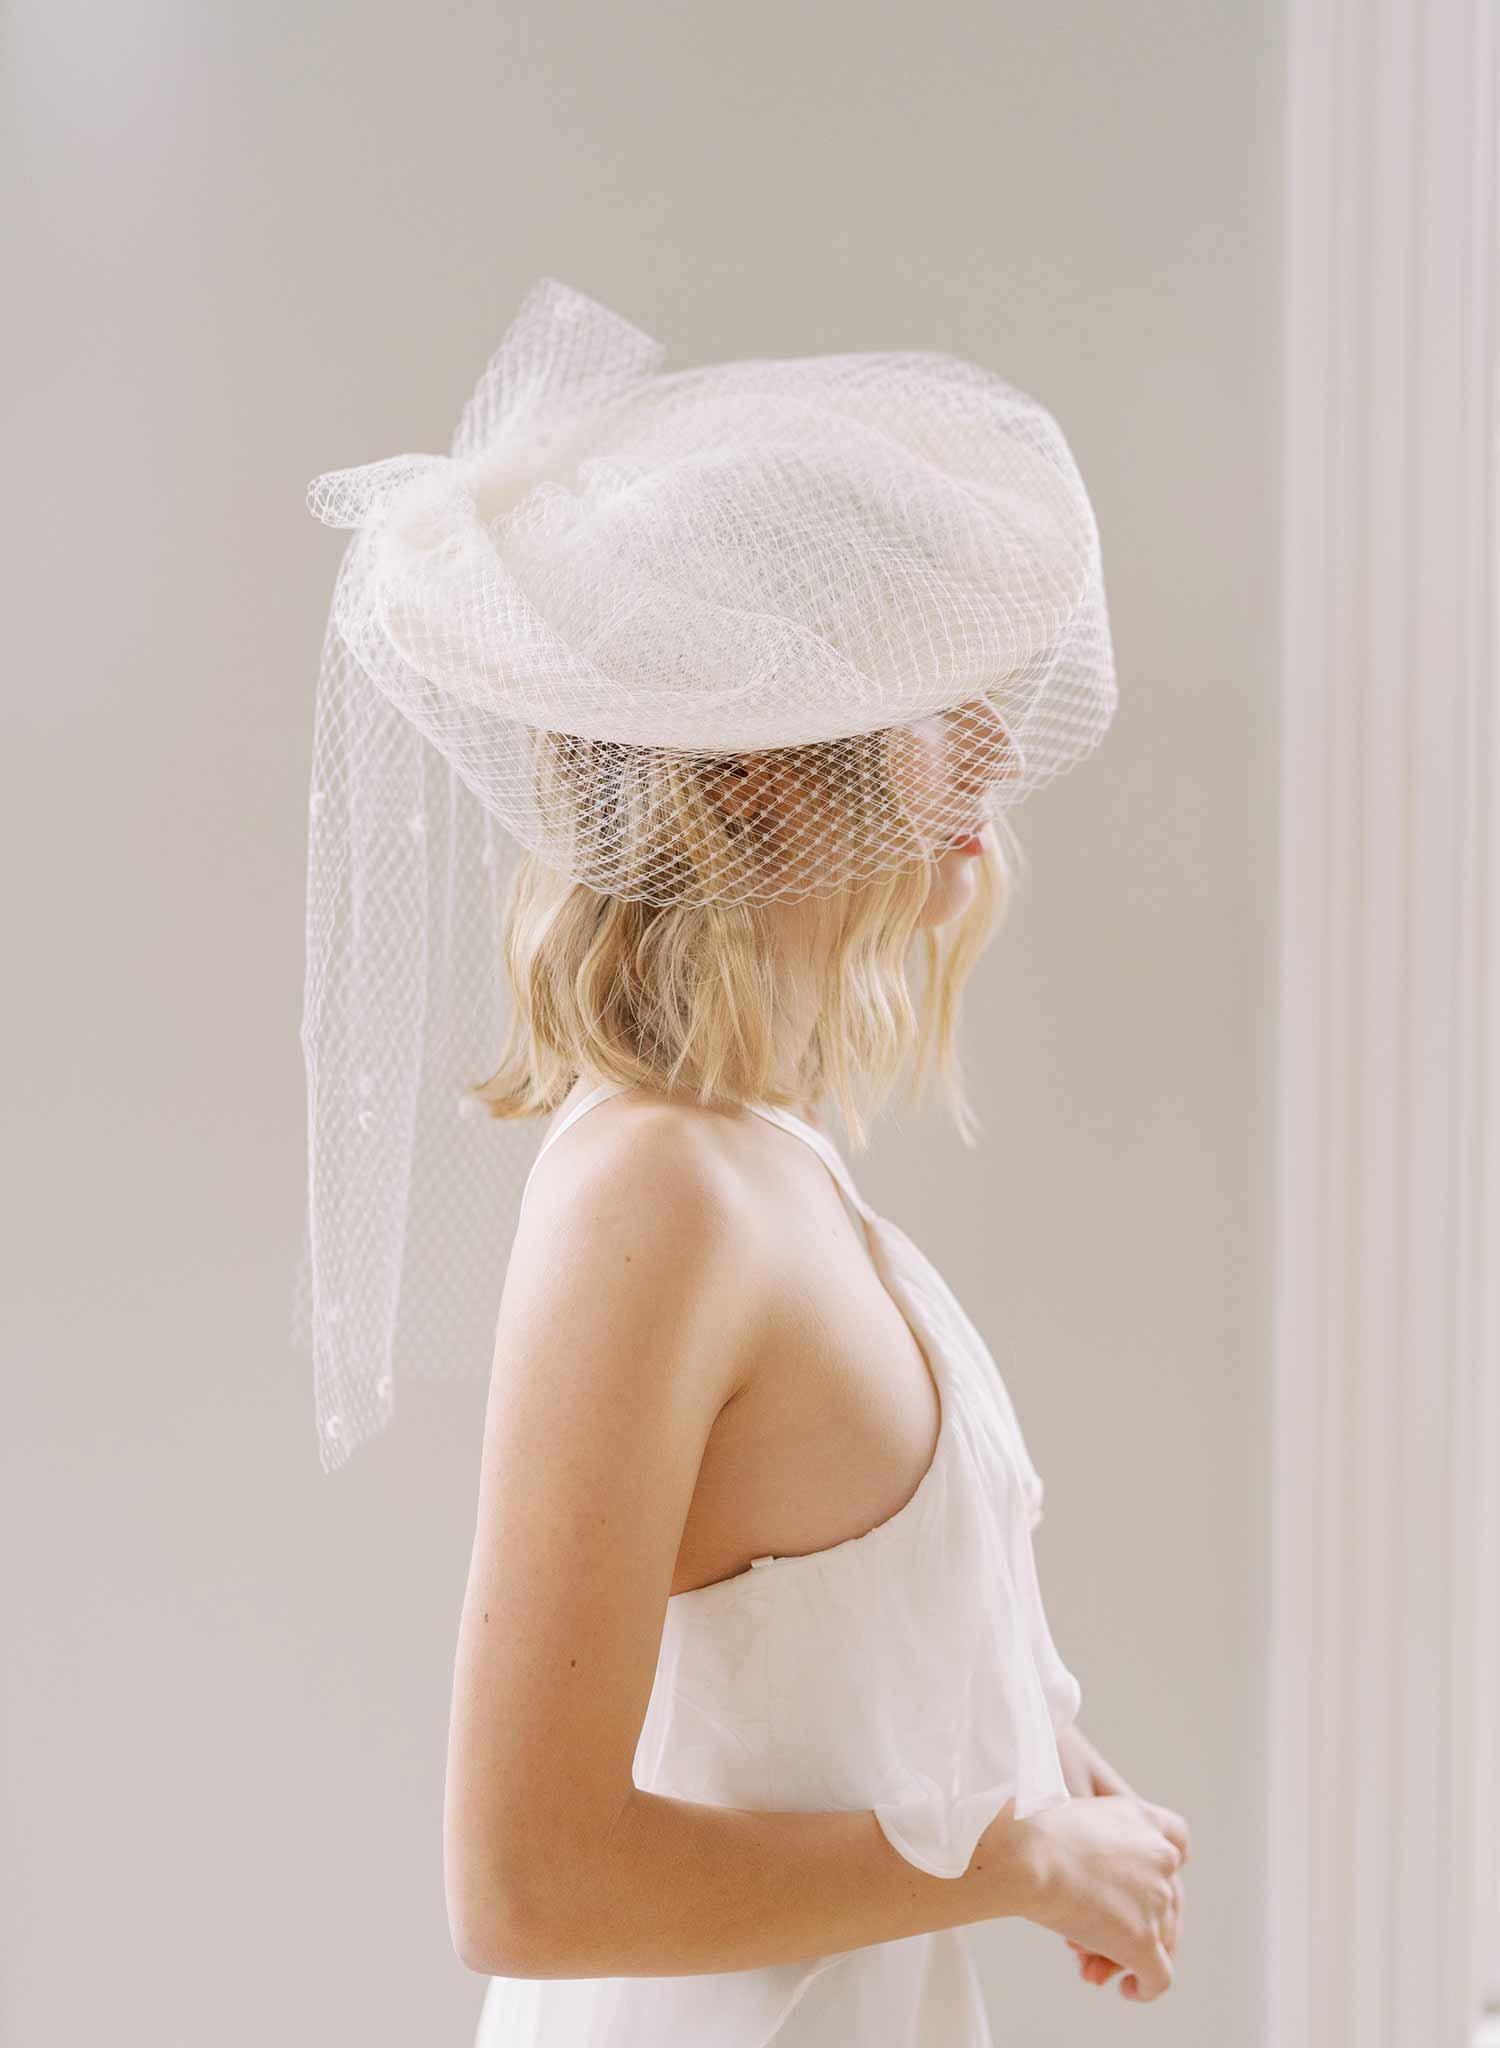 Vintage inspired bridal mini hat with veil - Style #2454